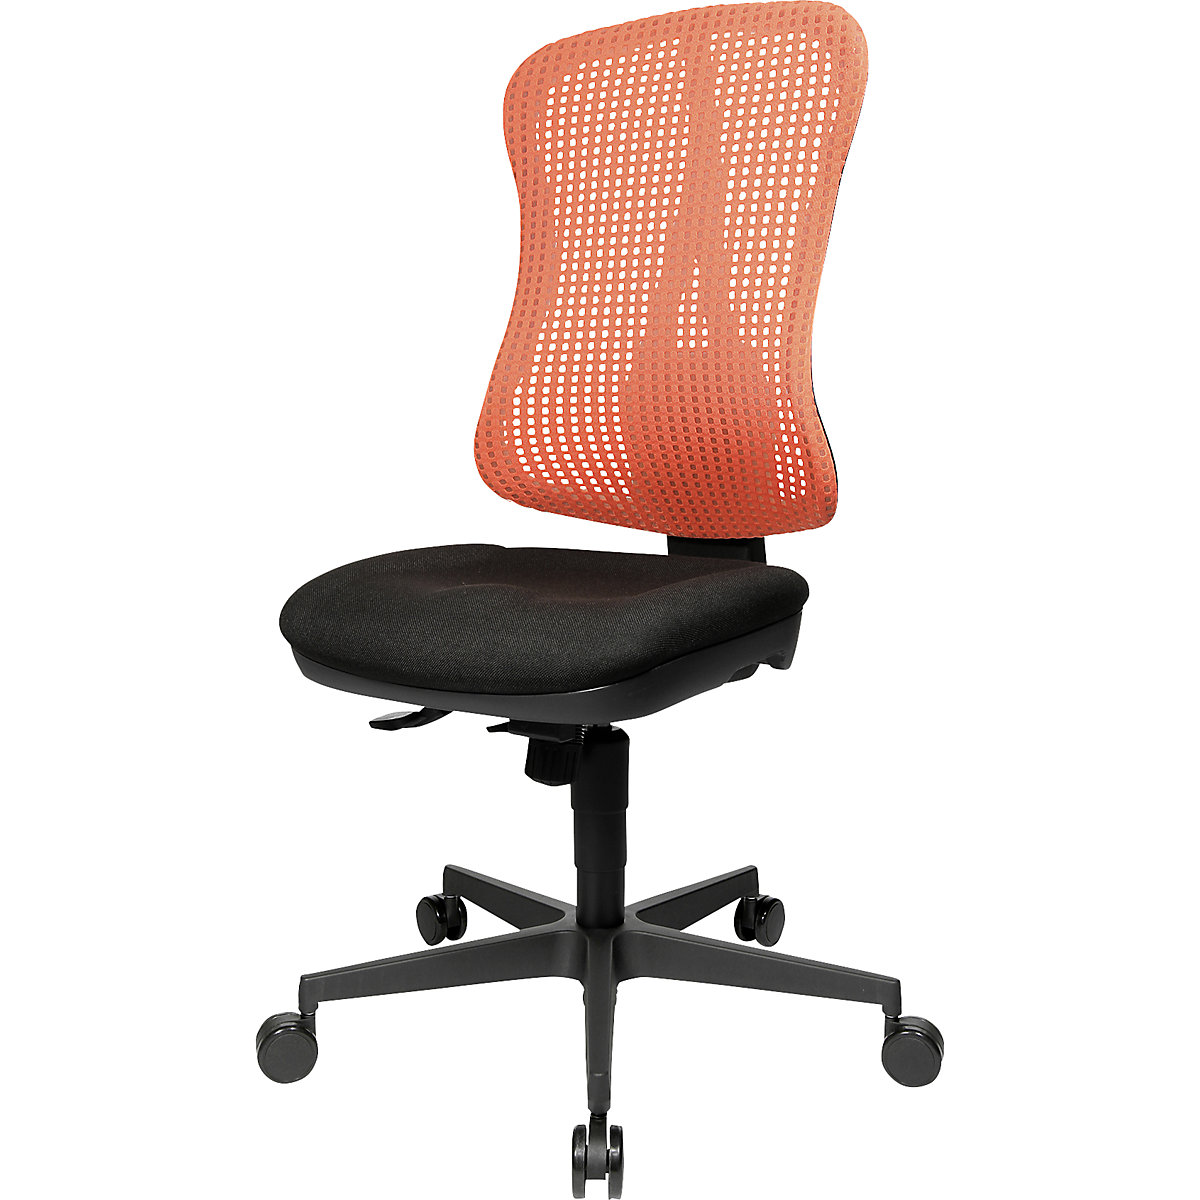 Ergonomic swivel chair, contoured seat – Topstar, without arm rests, black seat, red mesh back rest-9